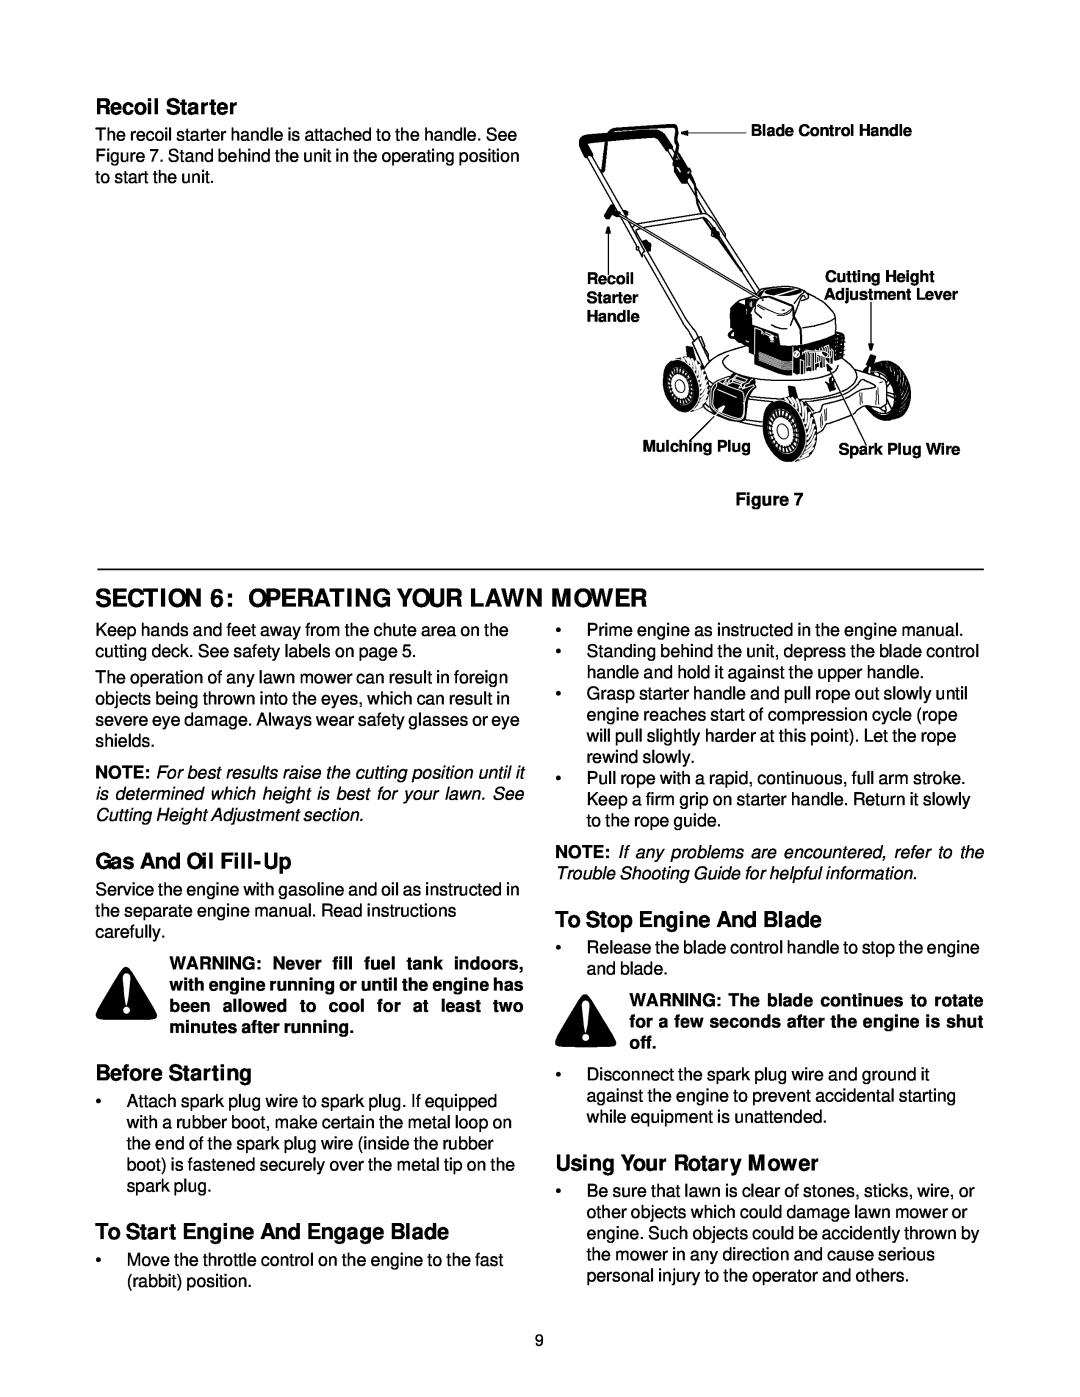 White LC-40 Operating Your Lawn Mower, Recoil Starter, Gas And Oil Fill-Up, Before Starting, To Stop Engine And Blade 